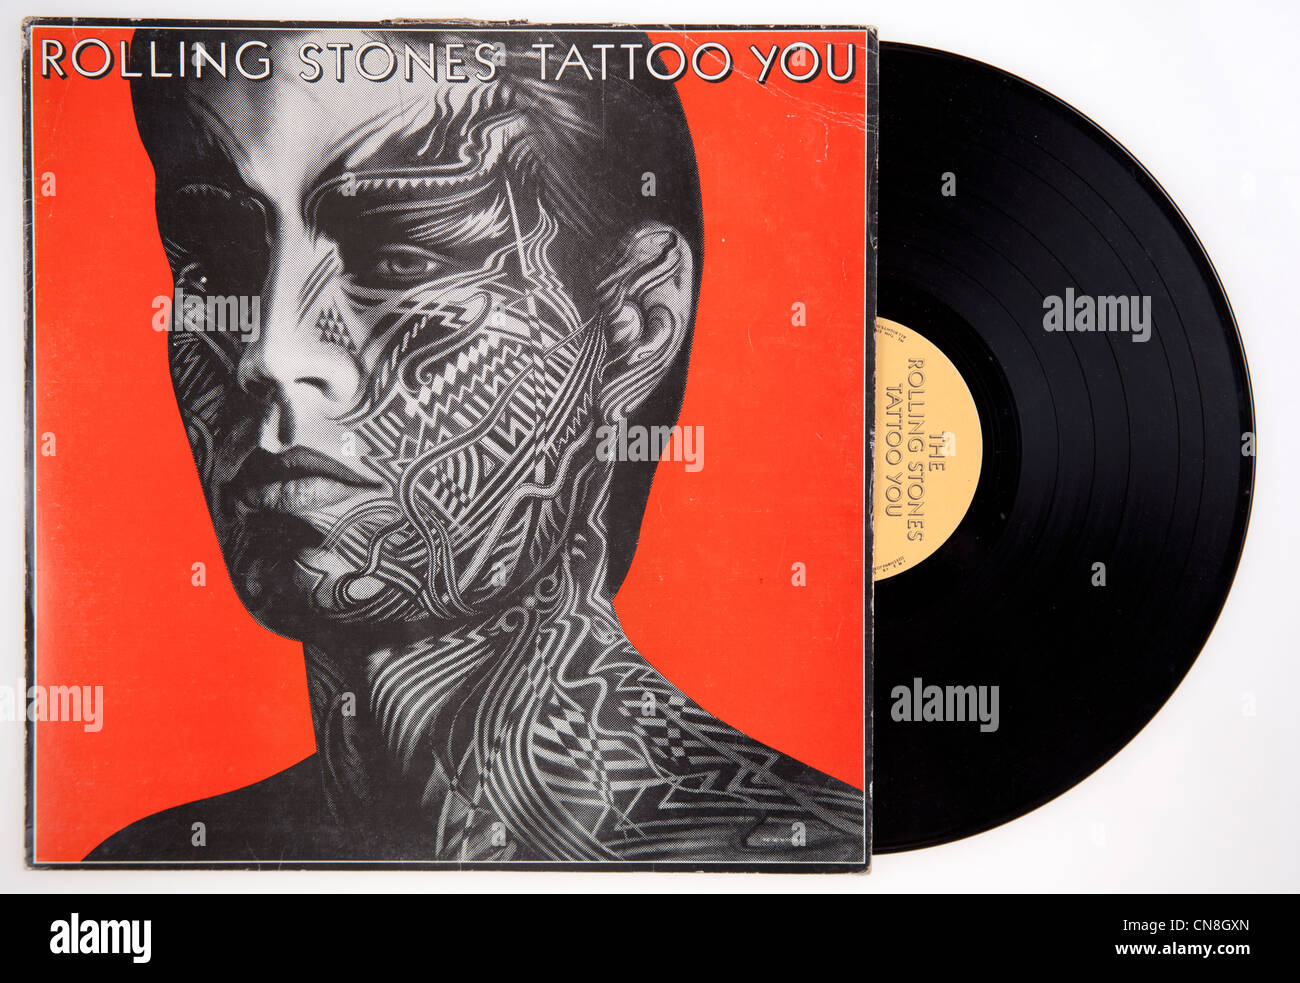 Buy The Rolling Stones  Tattoo You 4LP Limited Box Vinyl from 5000  Today  Best Deals on idealocouk